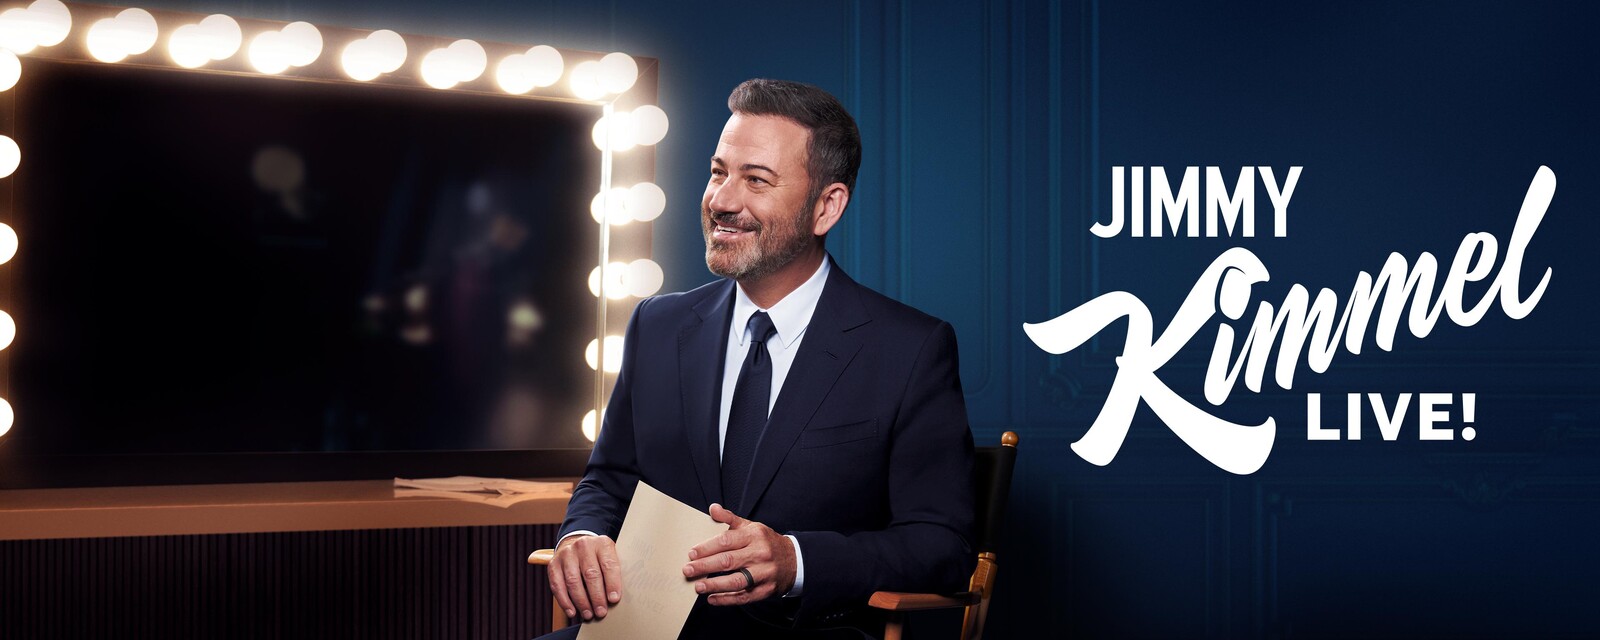 Jimmy Kimmel Live Schedule for the Week of 5/8/2023 | Jimmy Kimmel Live!